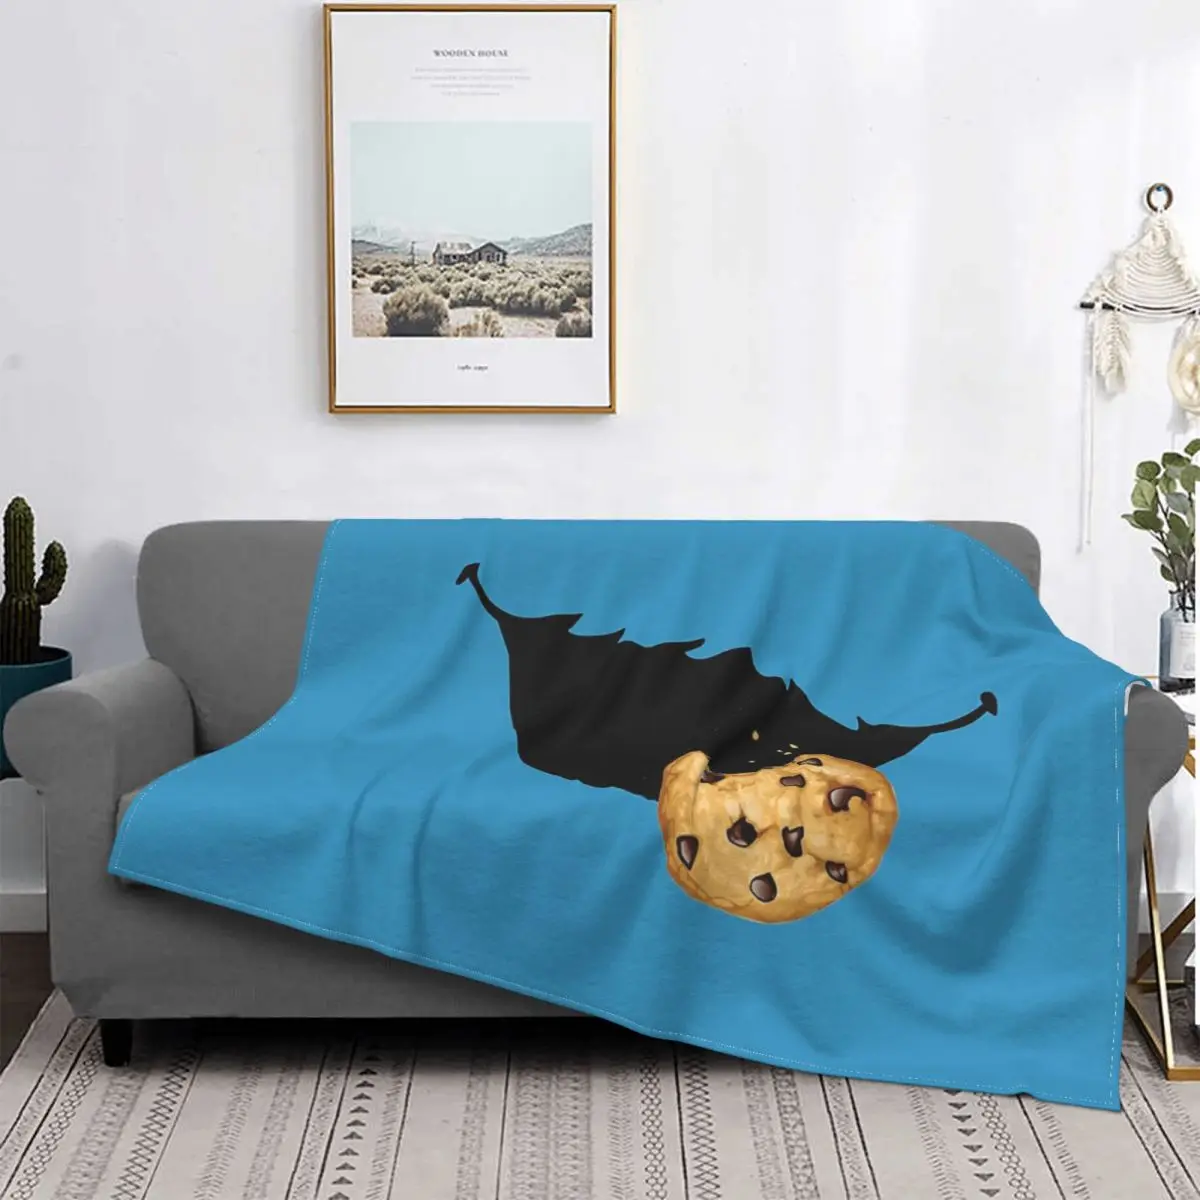 

Sofa Decor Cookie Monster Cartoon Throw Blanket Love Gifts Fluffy Flannel Blankets